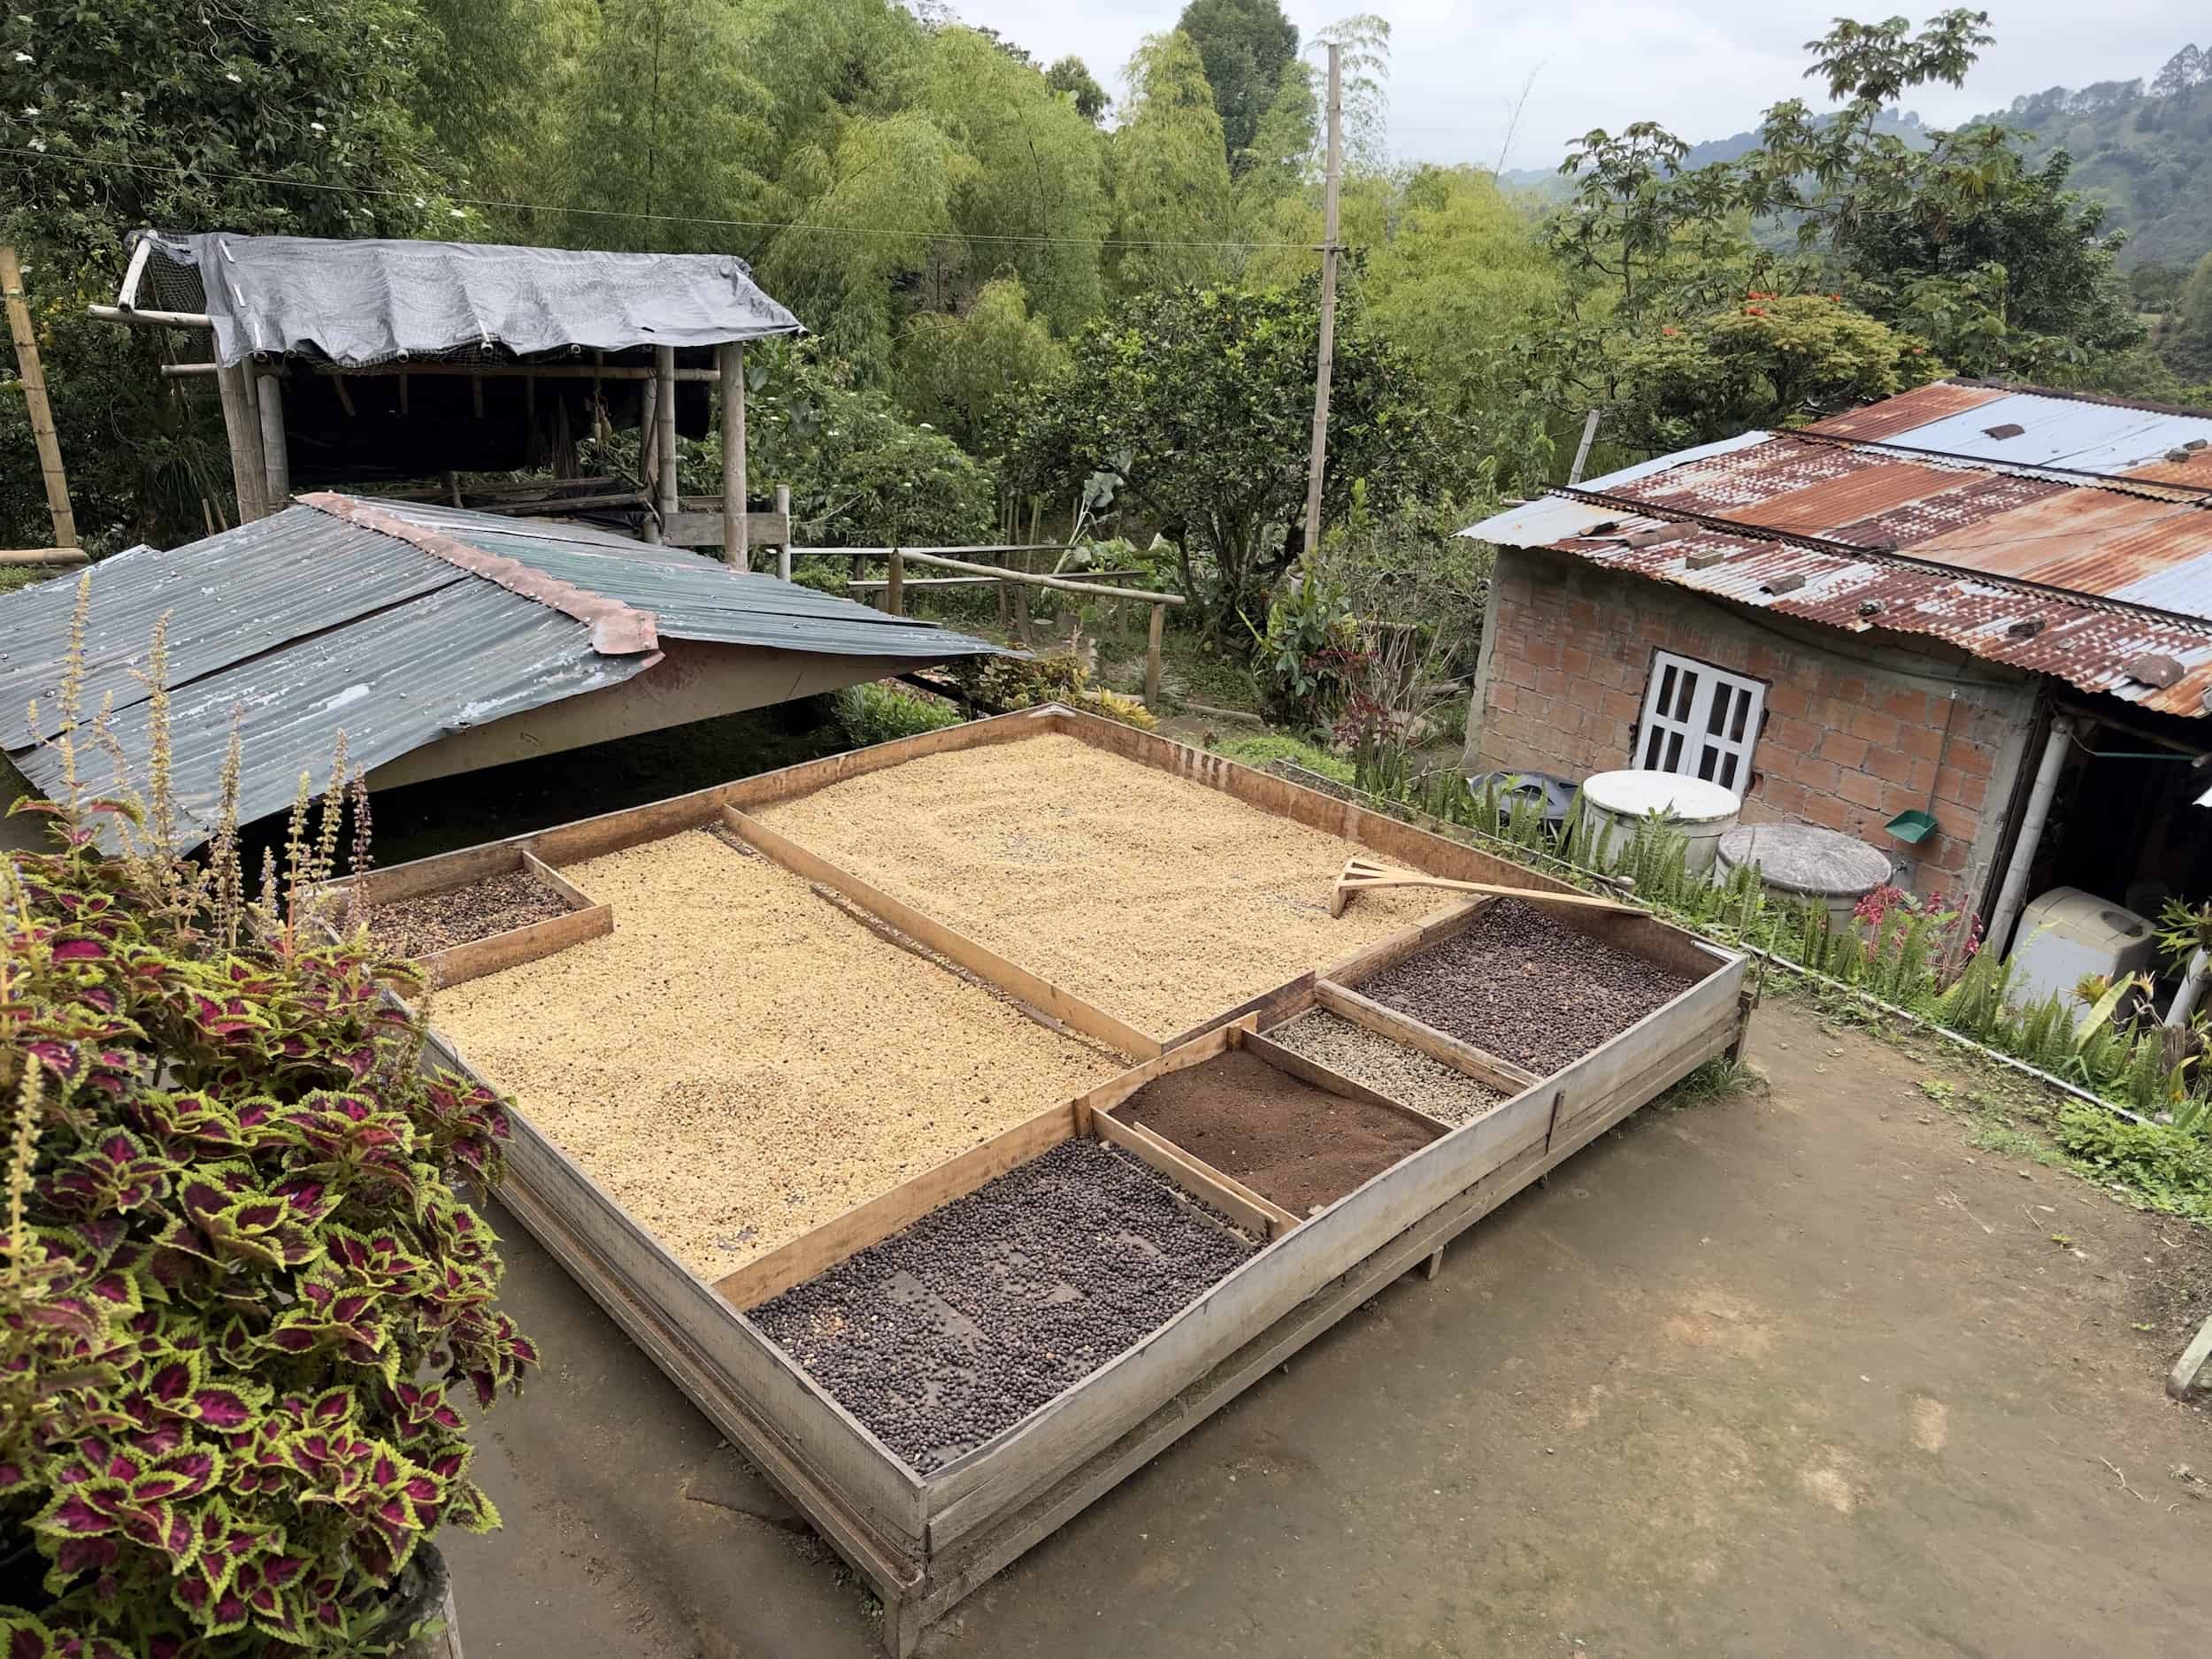 Drying station on the Luger Coffee Tour in Salento, Quindío, Colombia